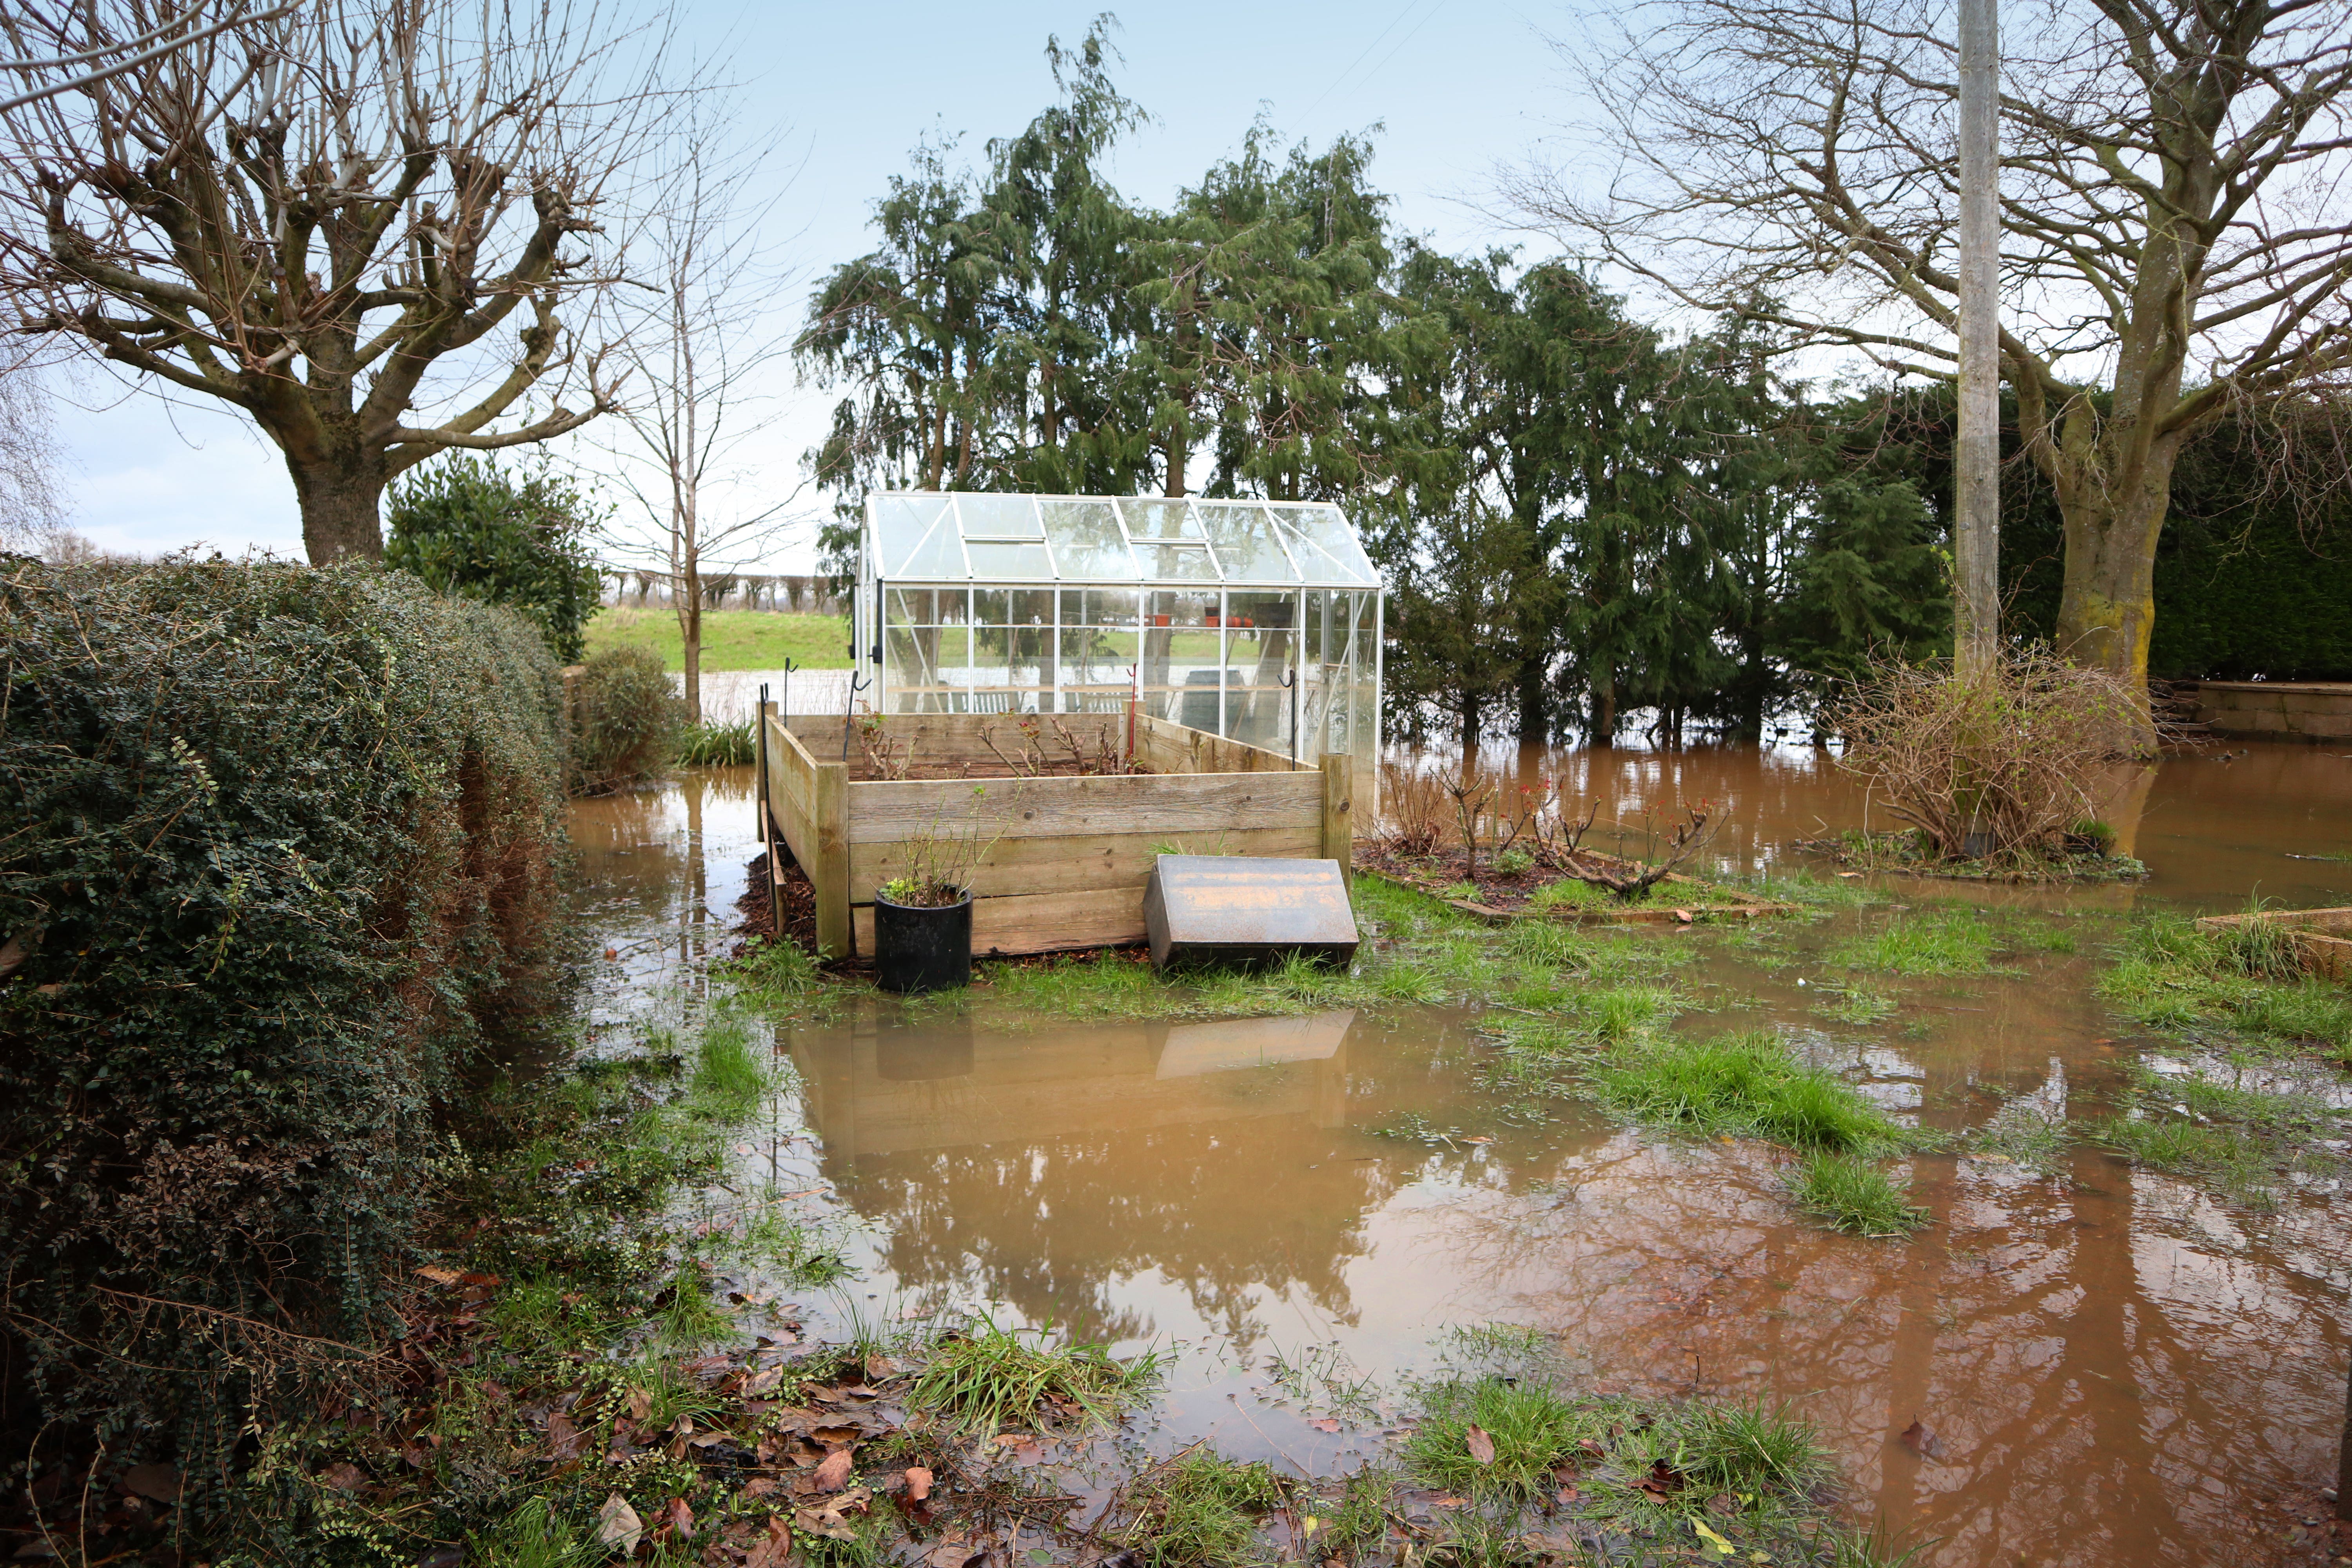 From investing in water butts to improving your soil, essential tips to avoid your garden flooding (Flood Re/PA)